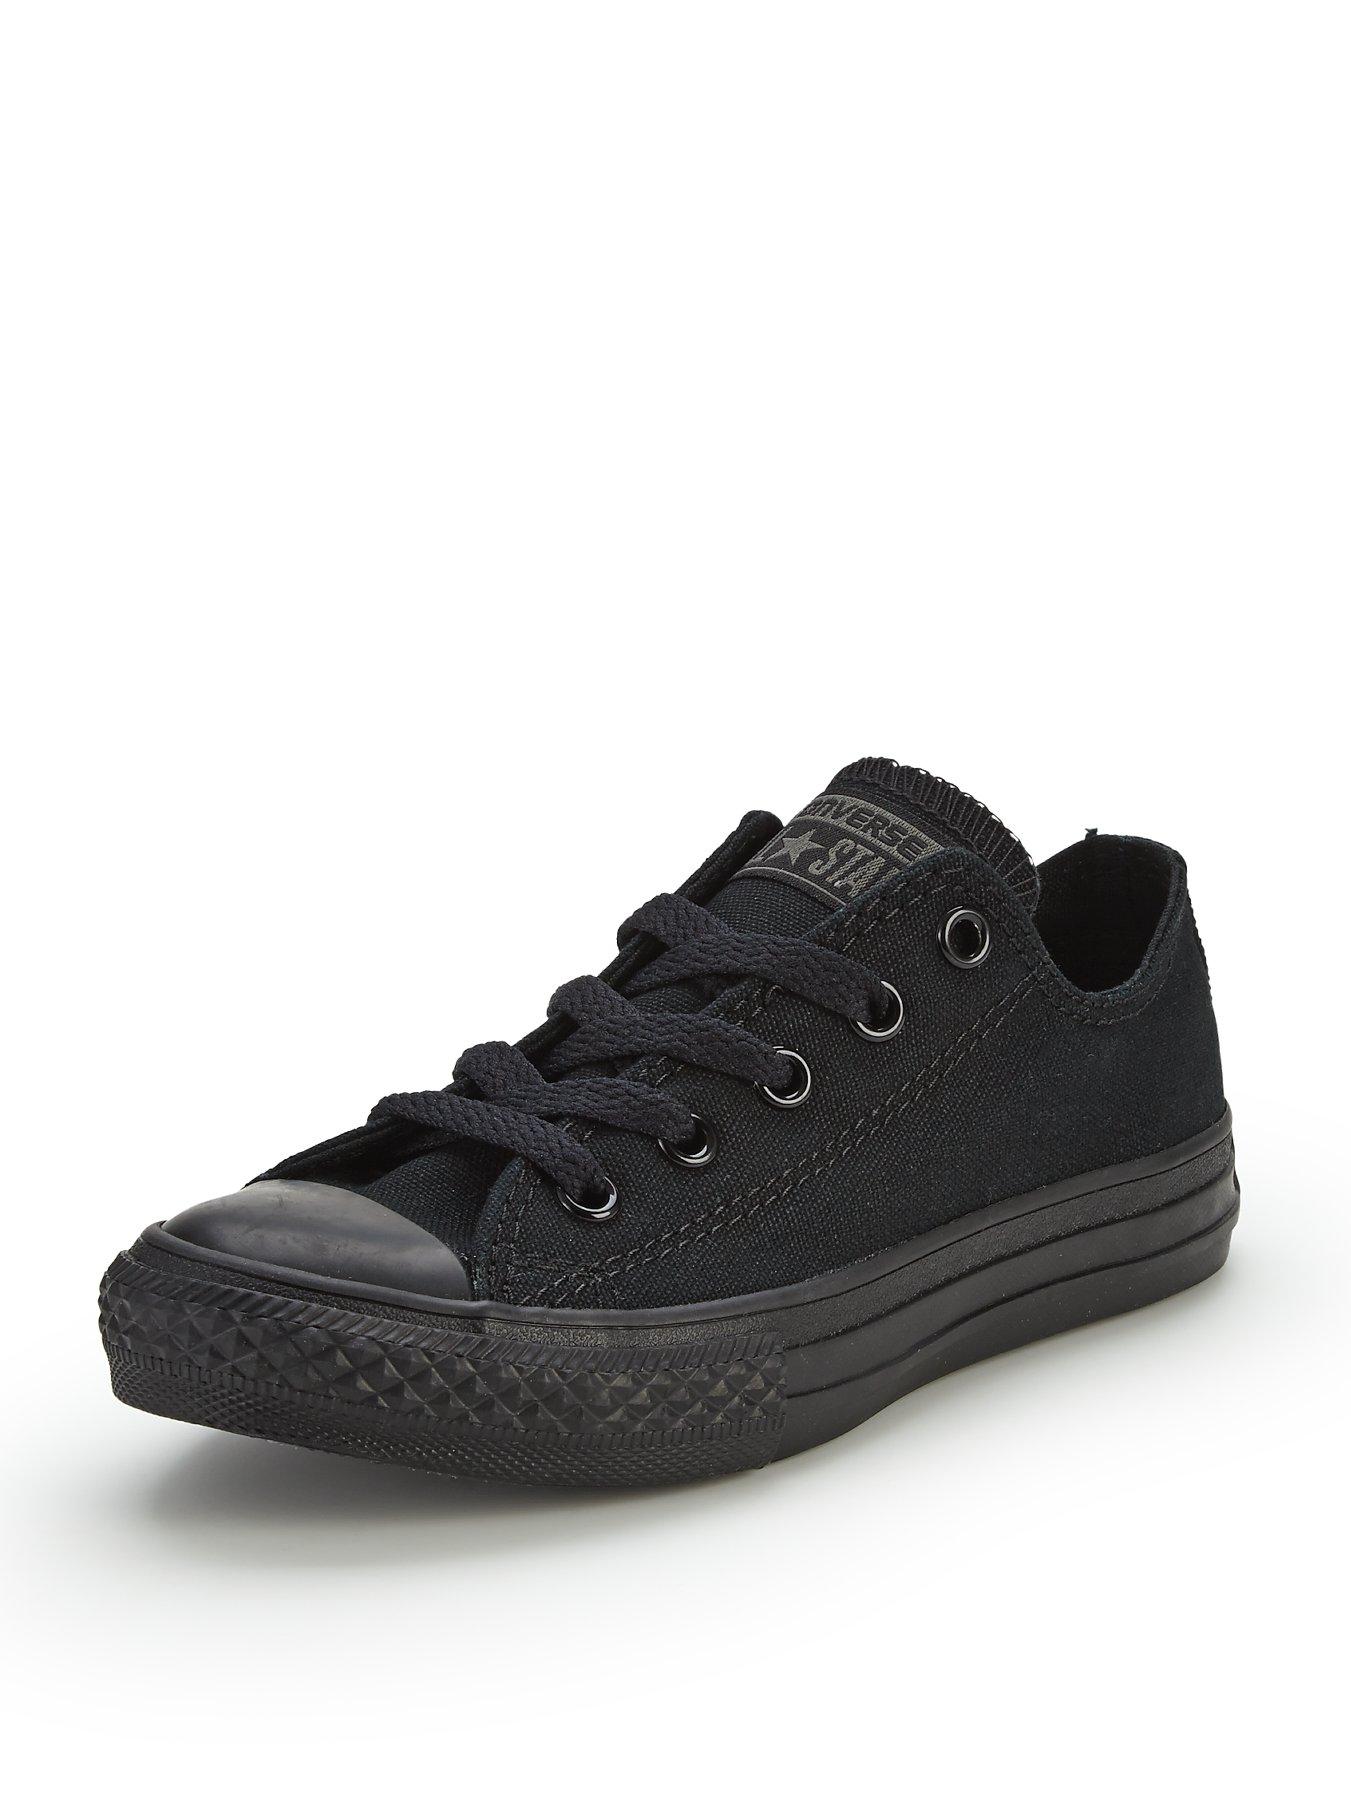 converse all star ox leather junior